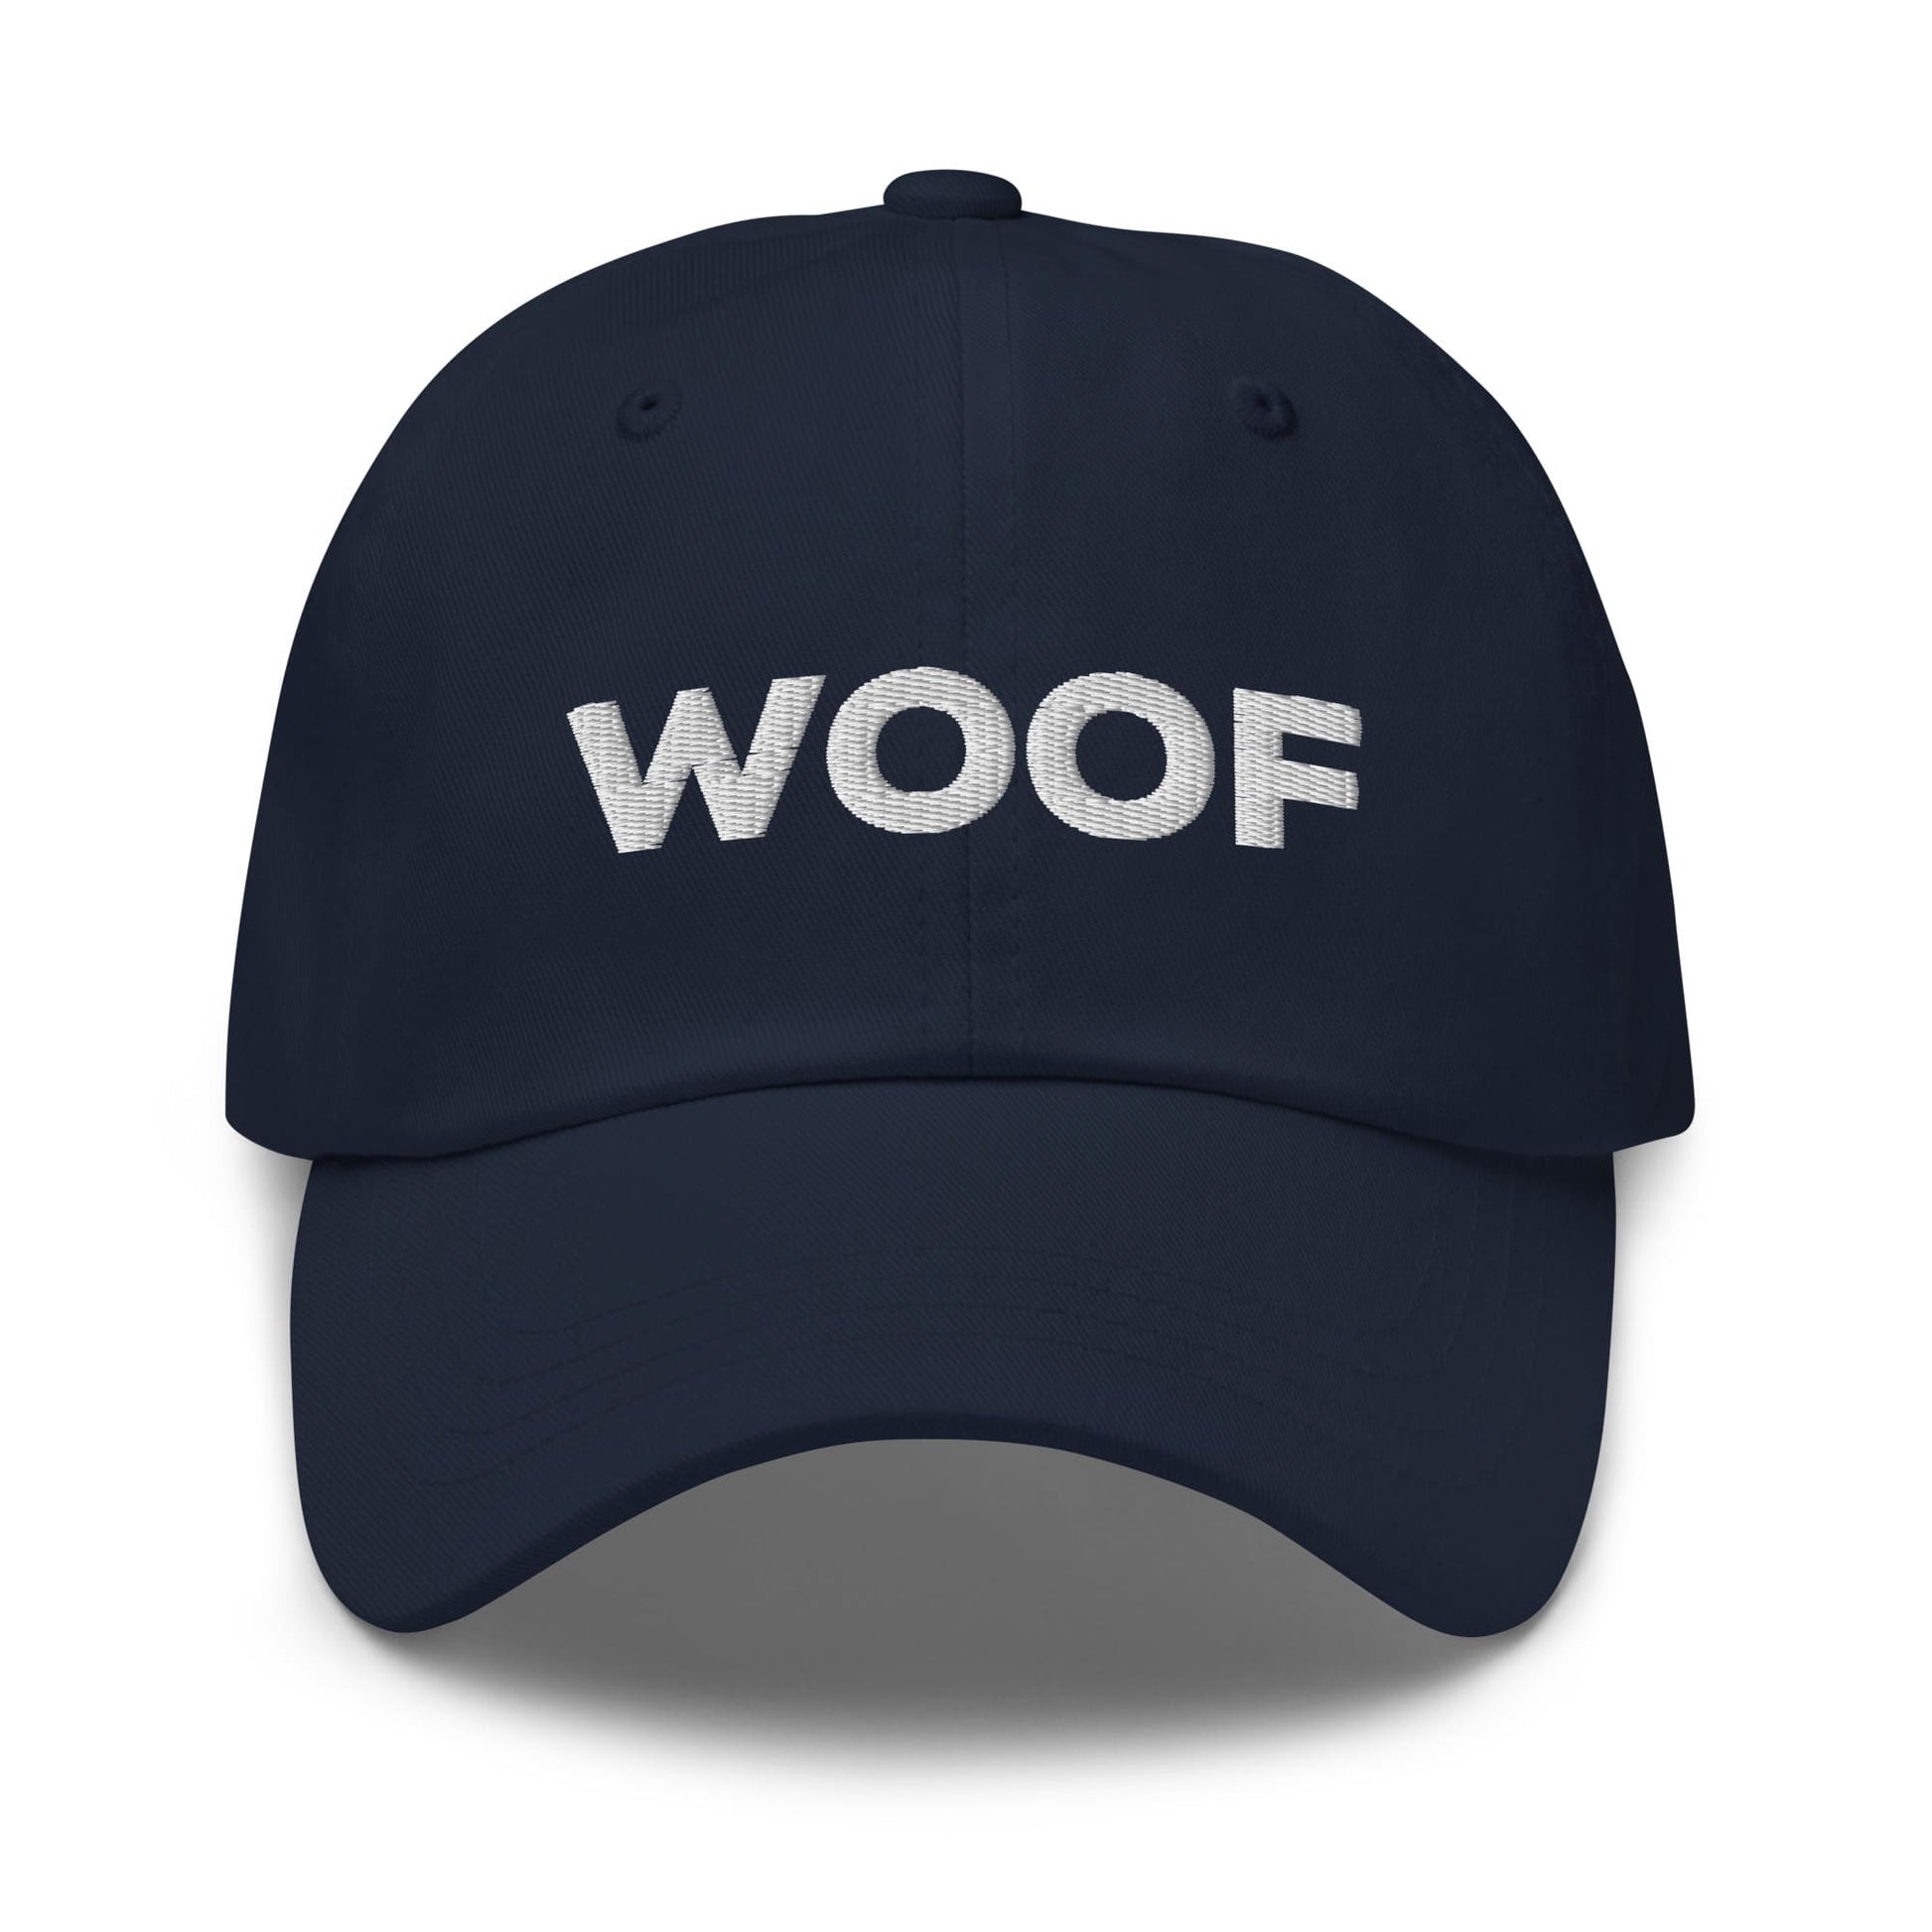 woof hat, embroidered bear pride or puppy play pride cap, navy